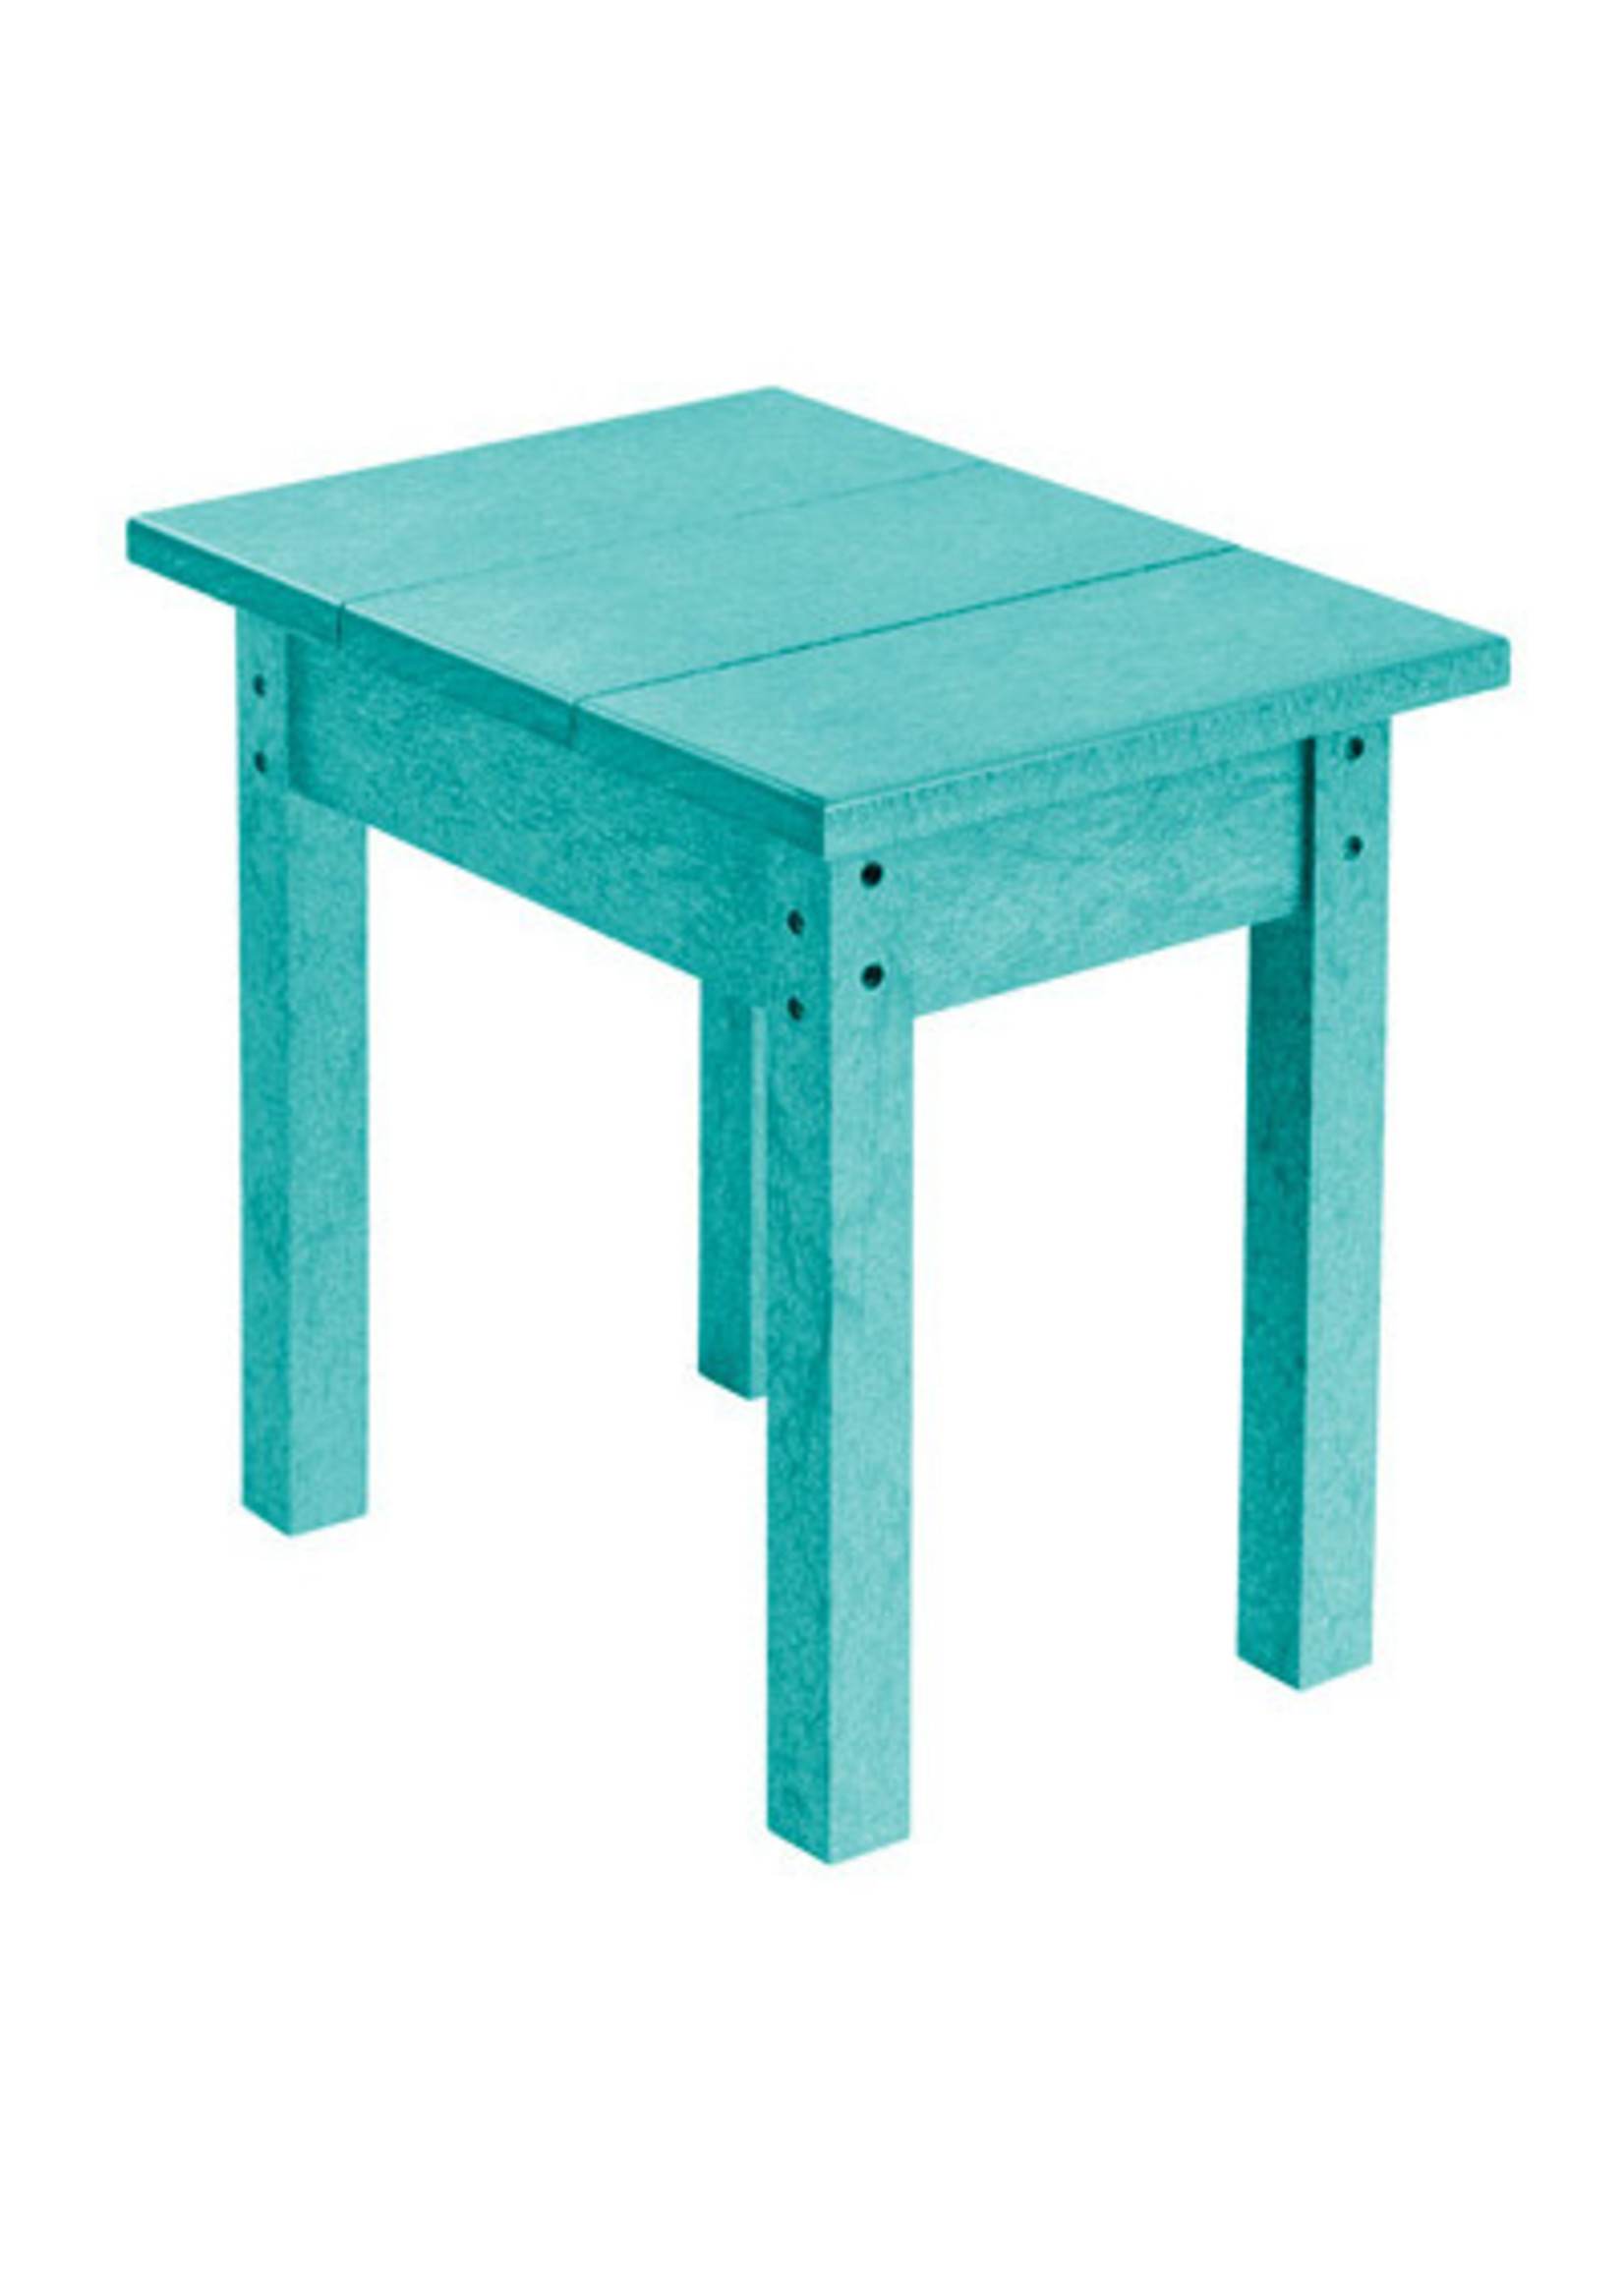 C.R. Plastic Products 181.T01 * Small Rectangular Table, Generation Line